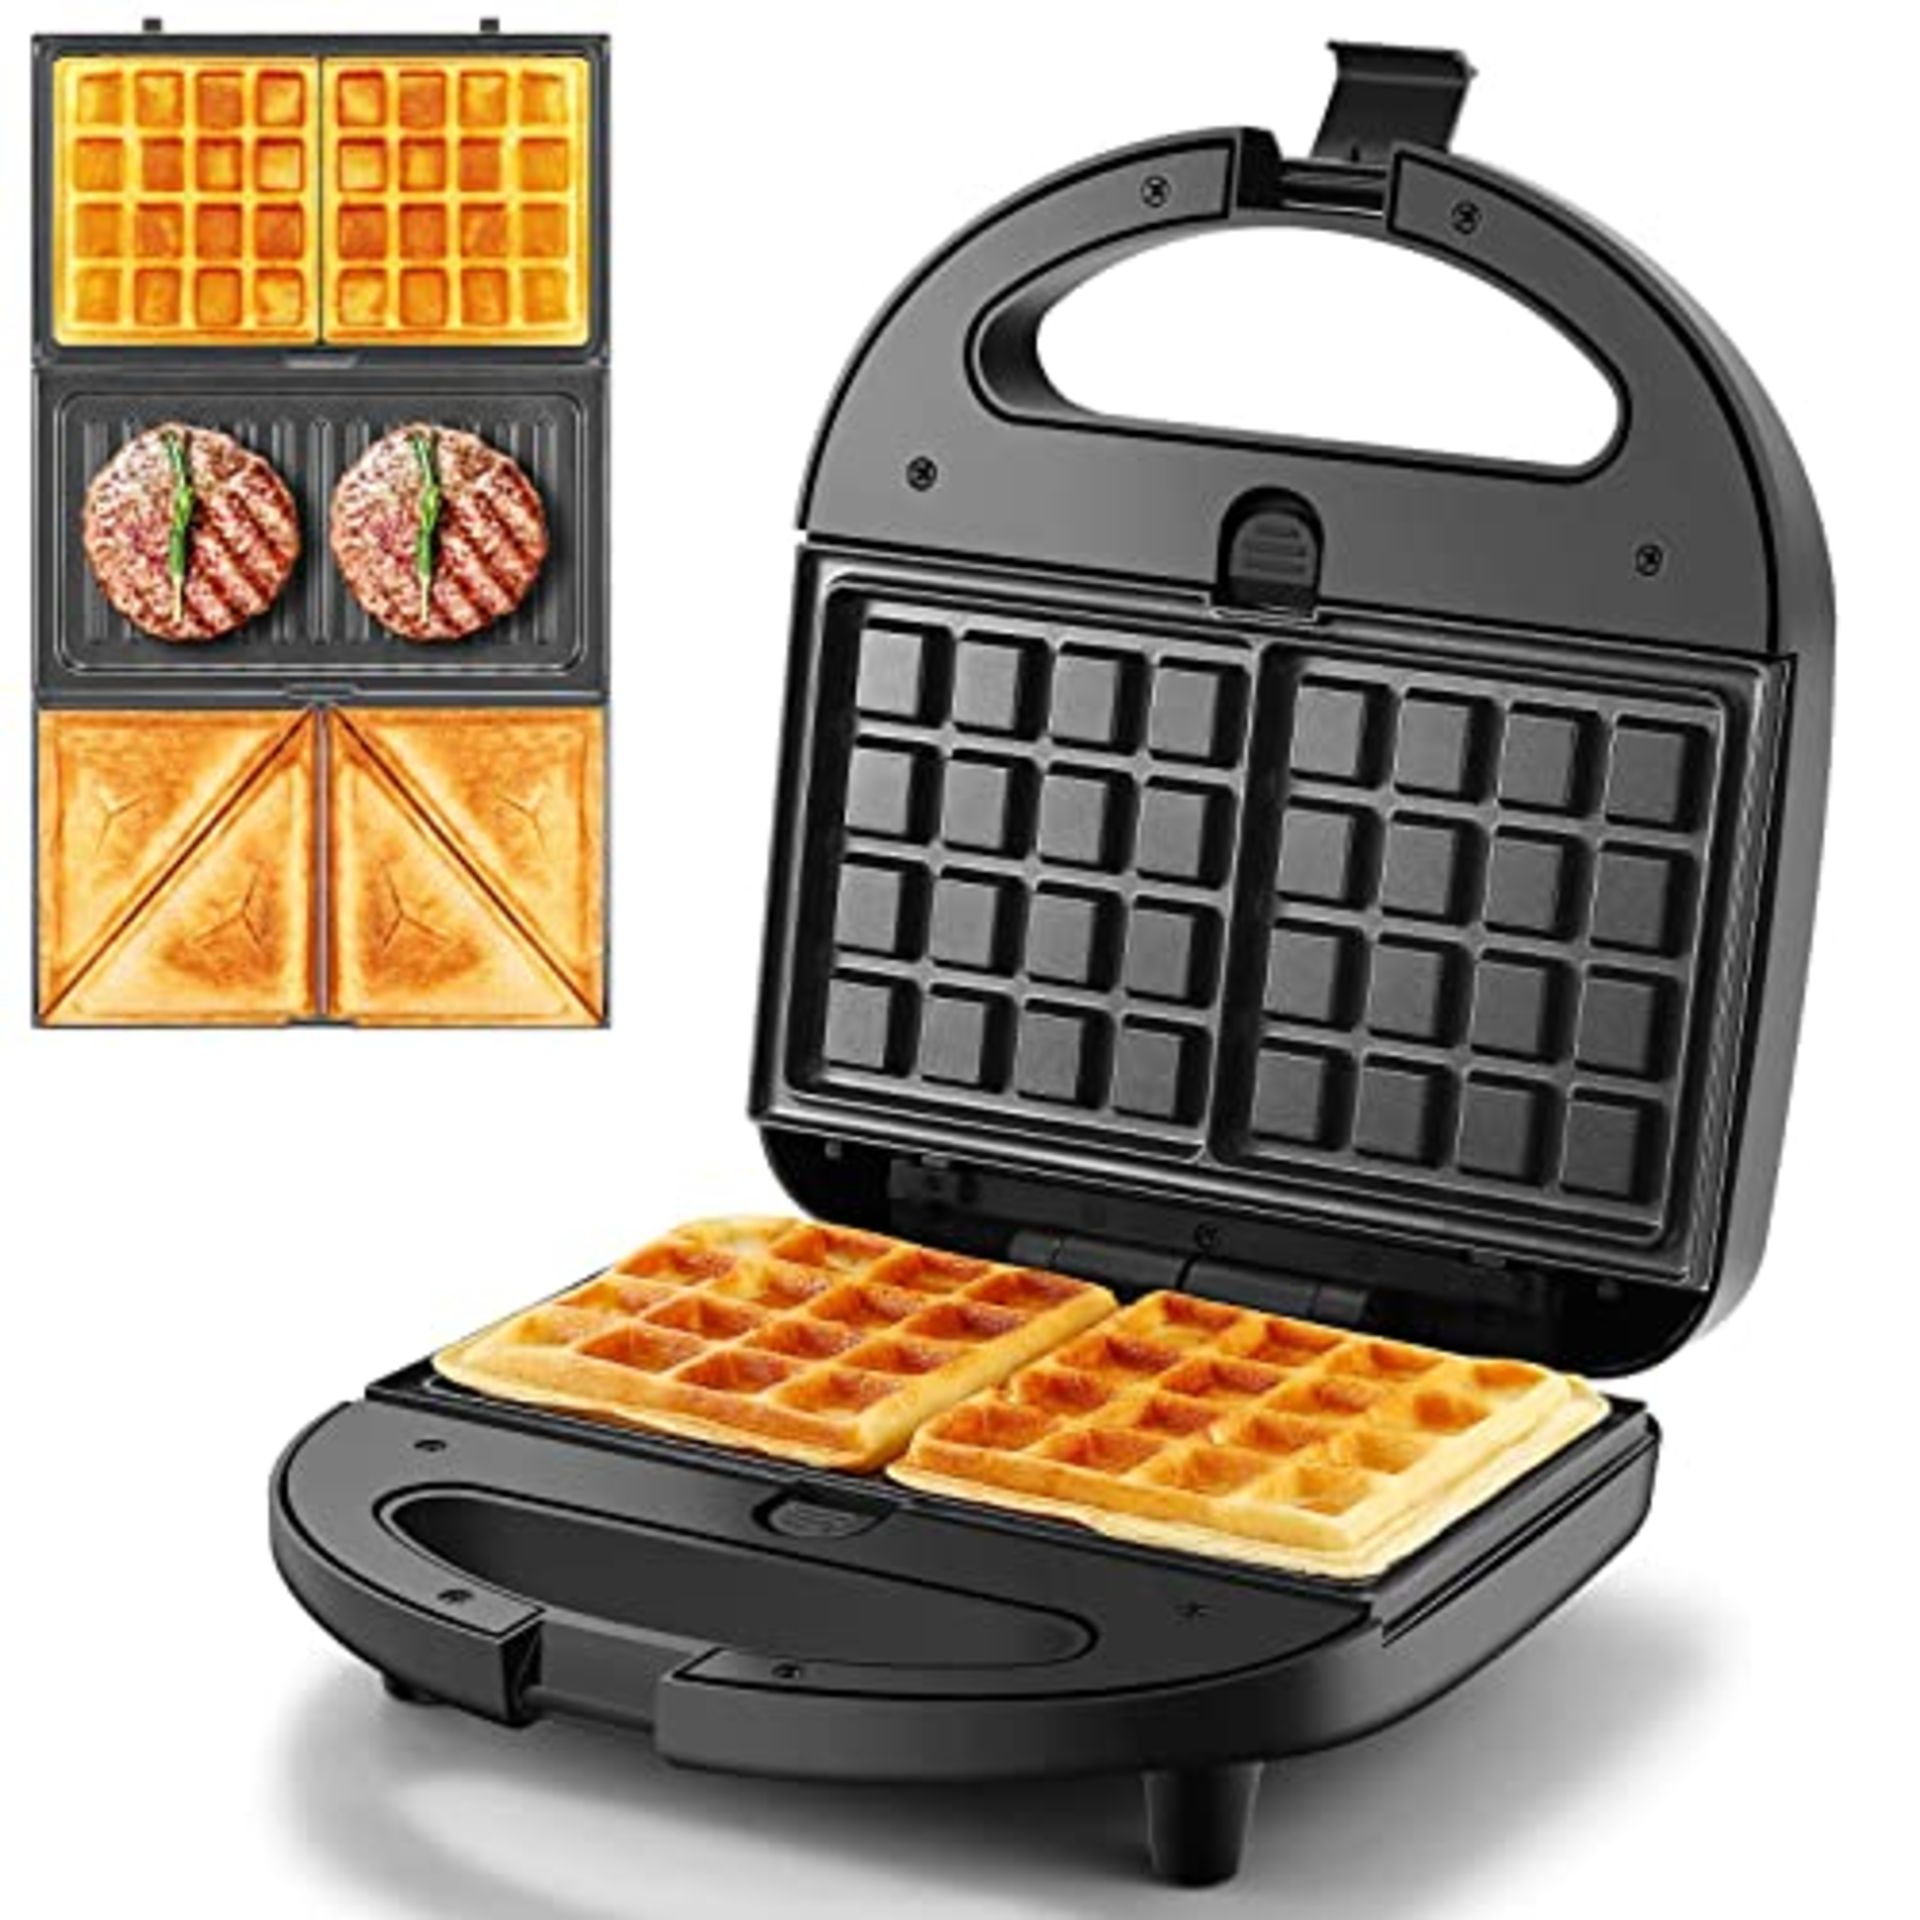 Tiastar ABS06 3-in-1, Interchangeable Non-Stick Cooking Plates, Waffle, Panini Press,